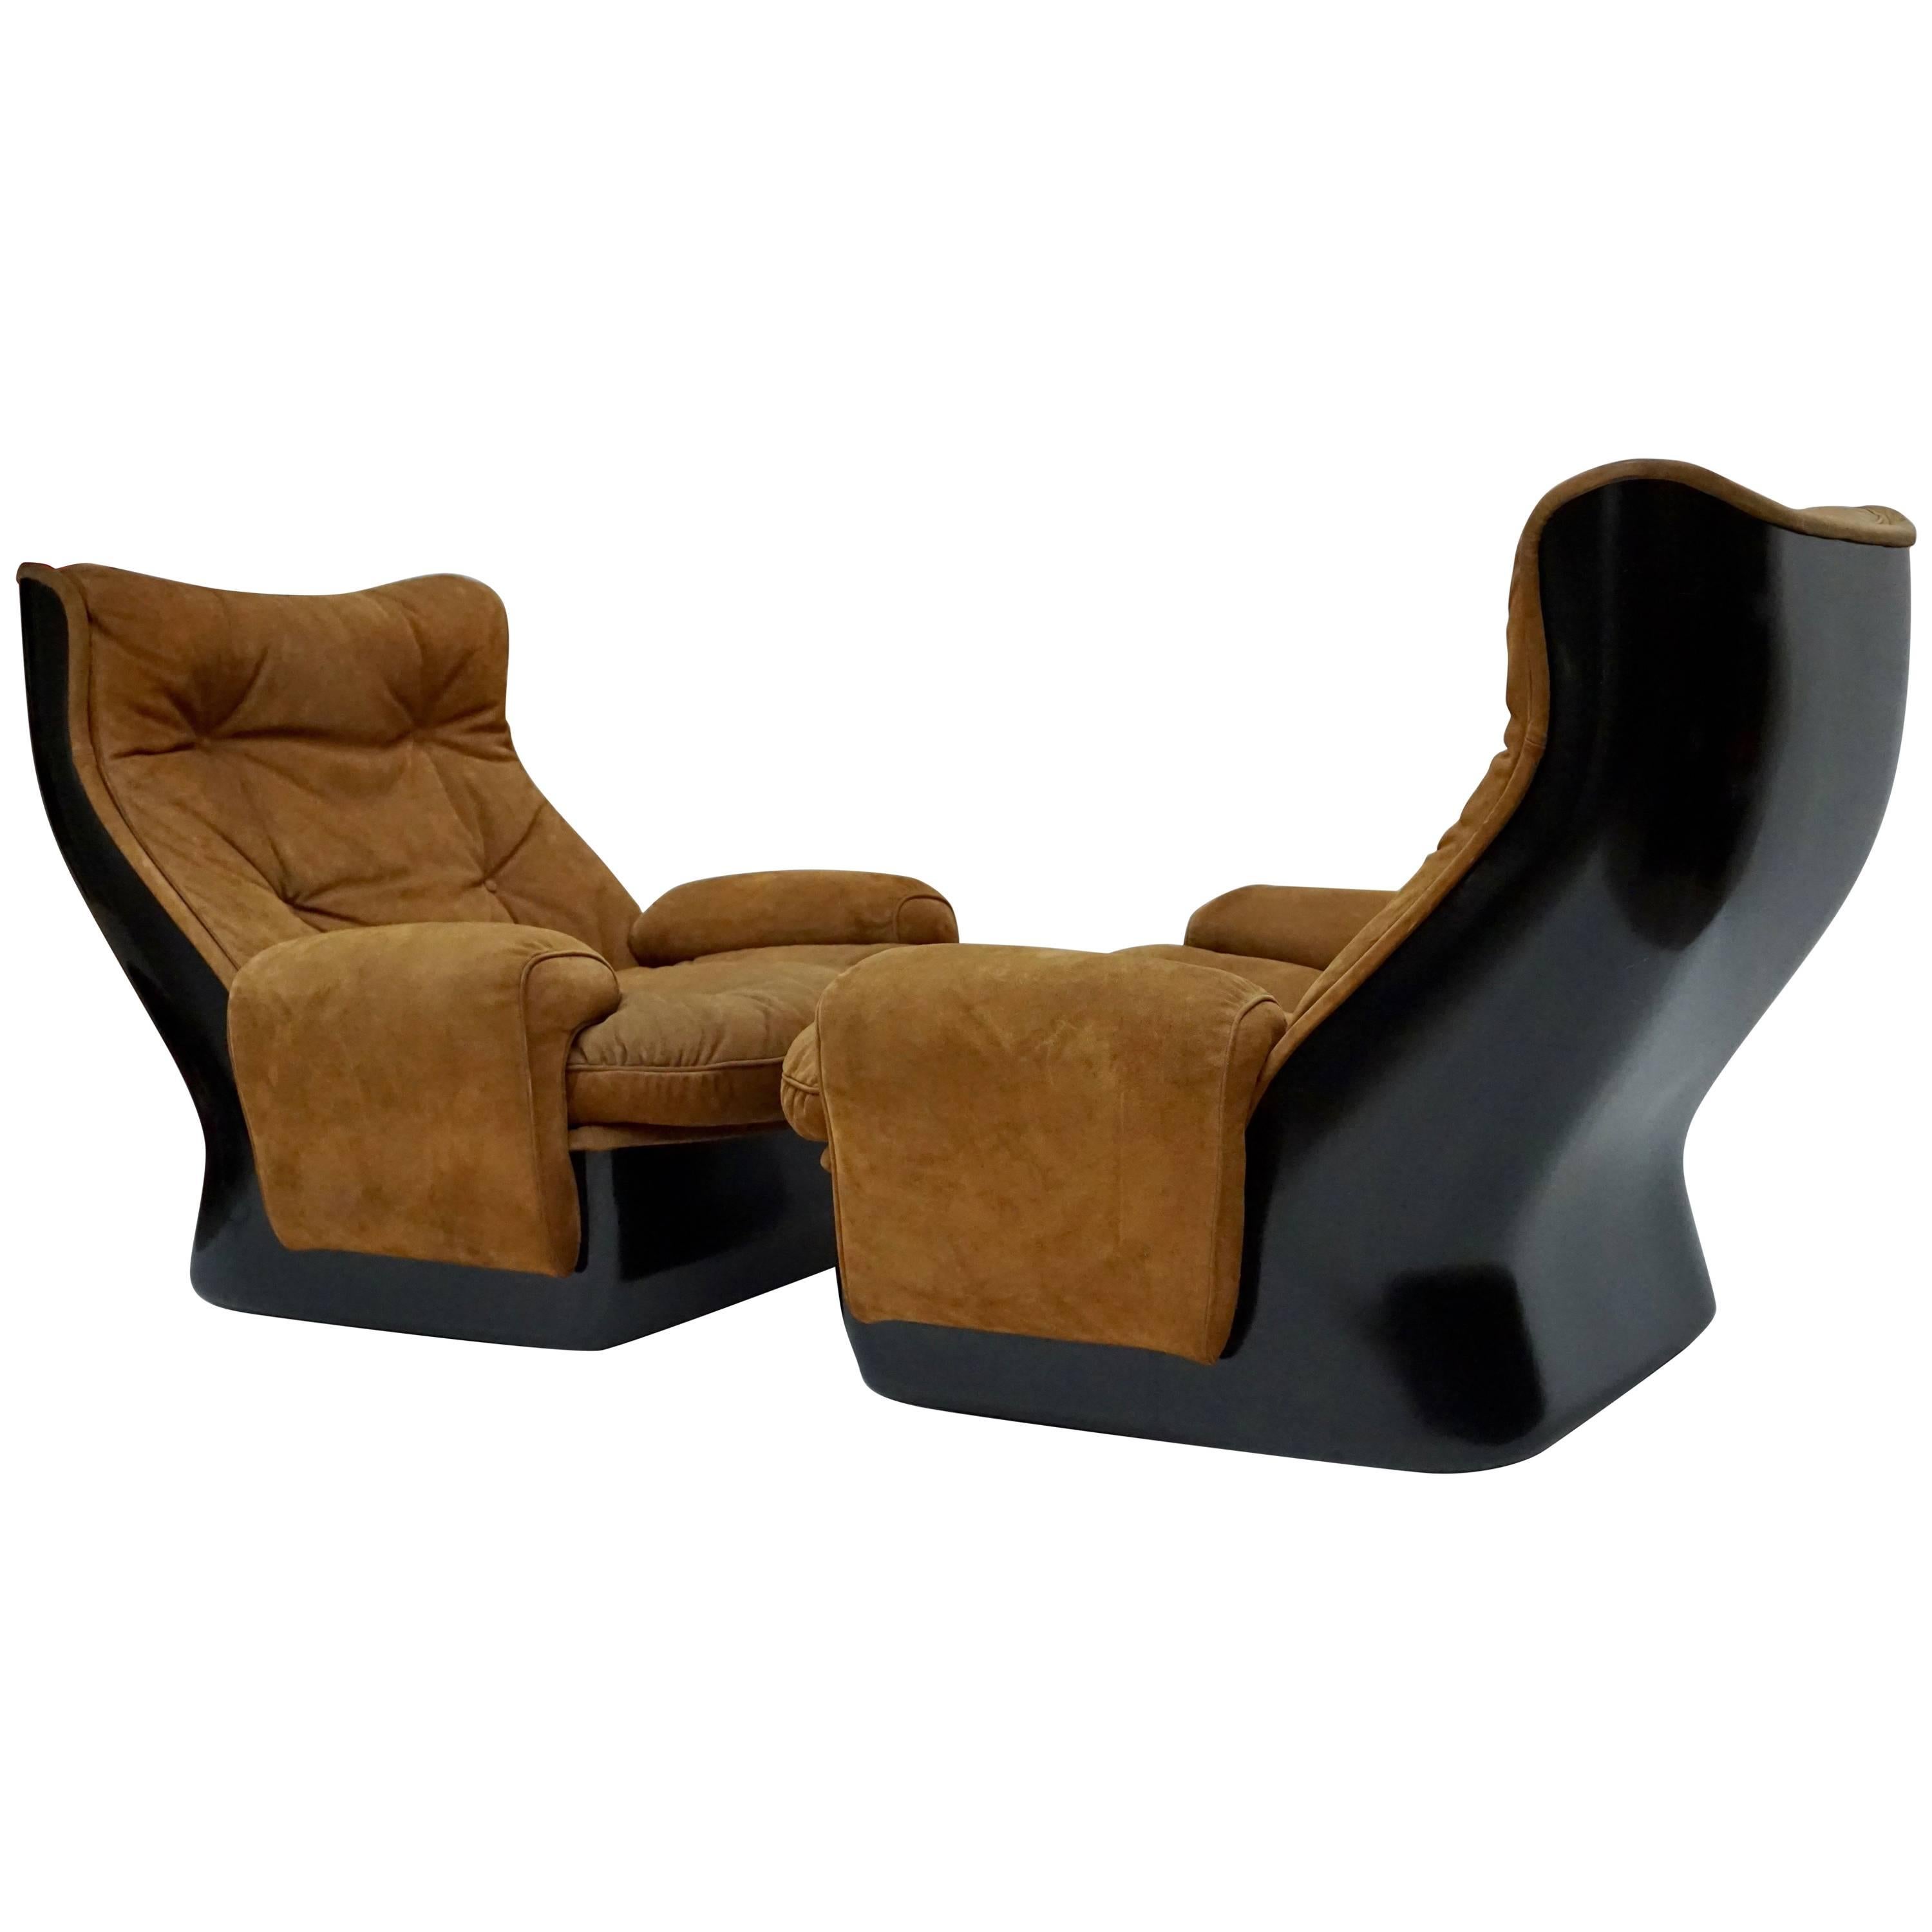 Two Lounge Chairs by Airborne International, circa 1970s For Sale